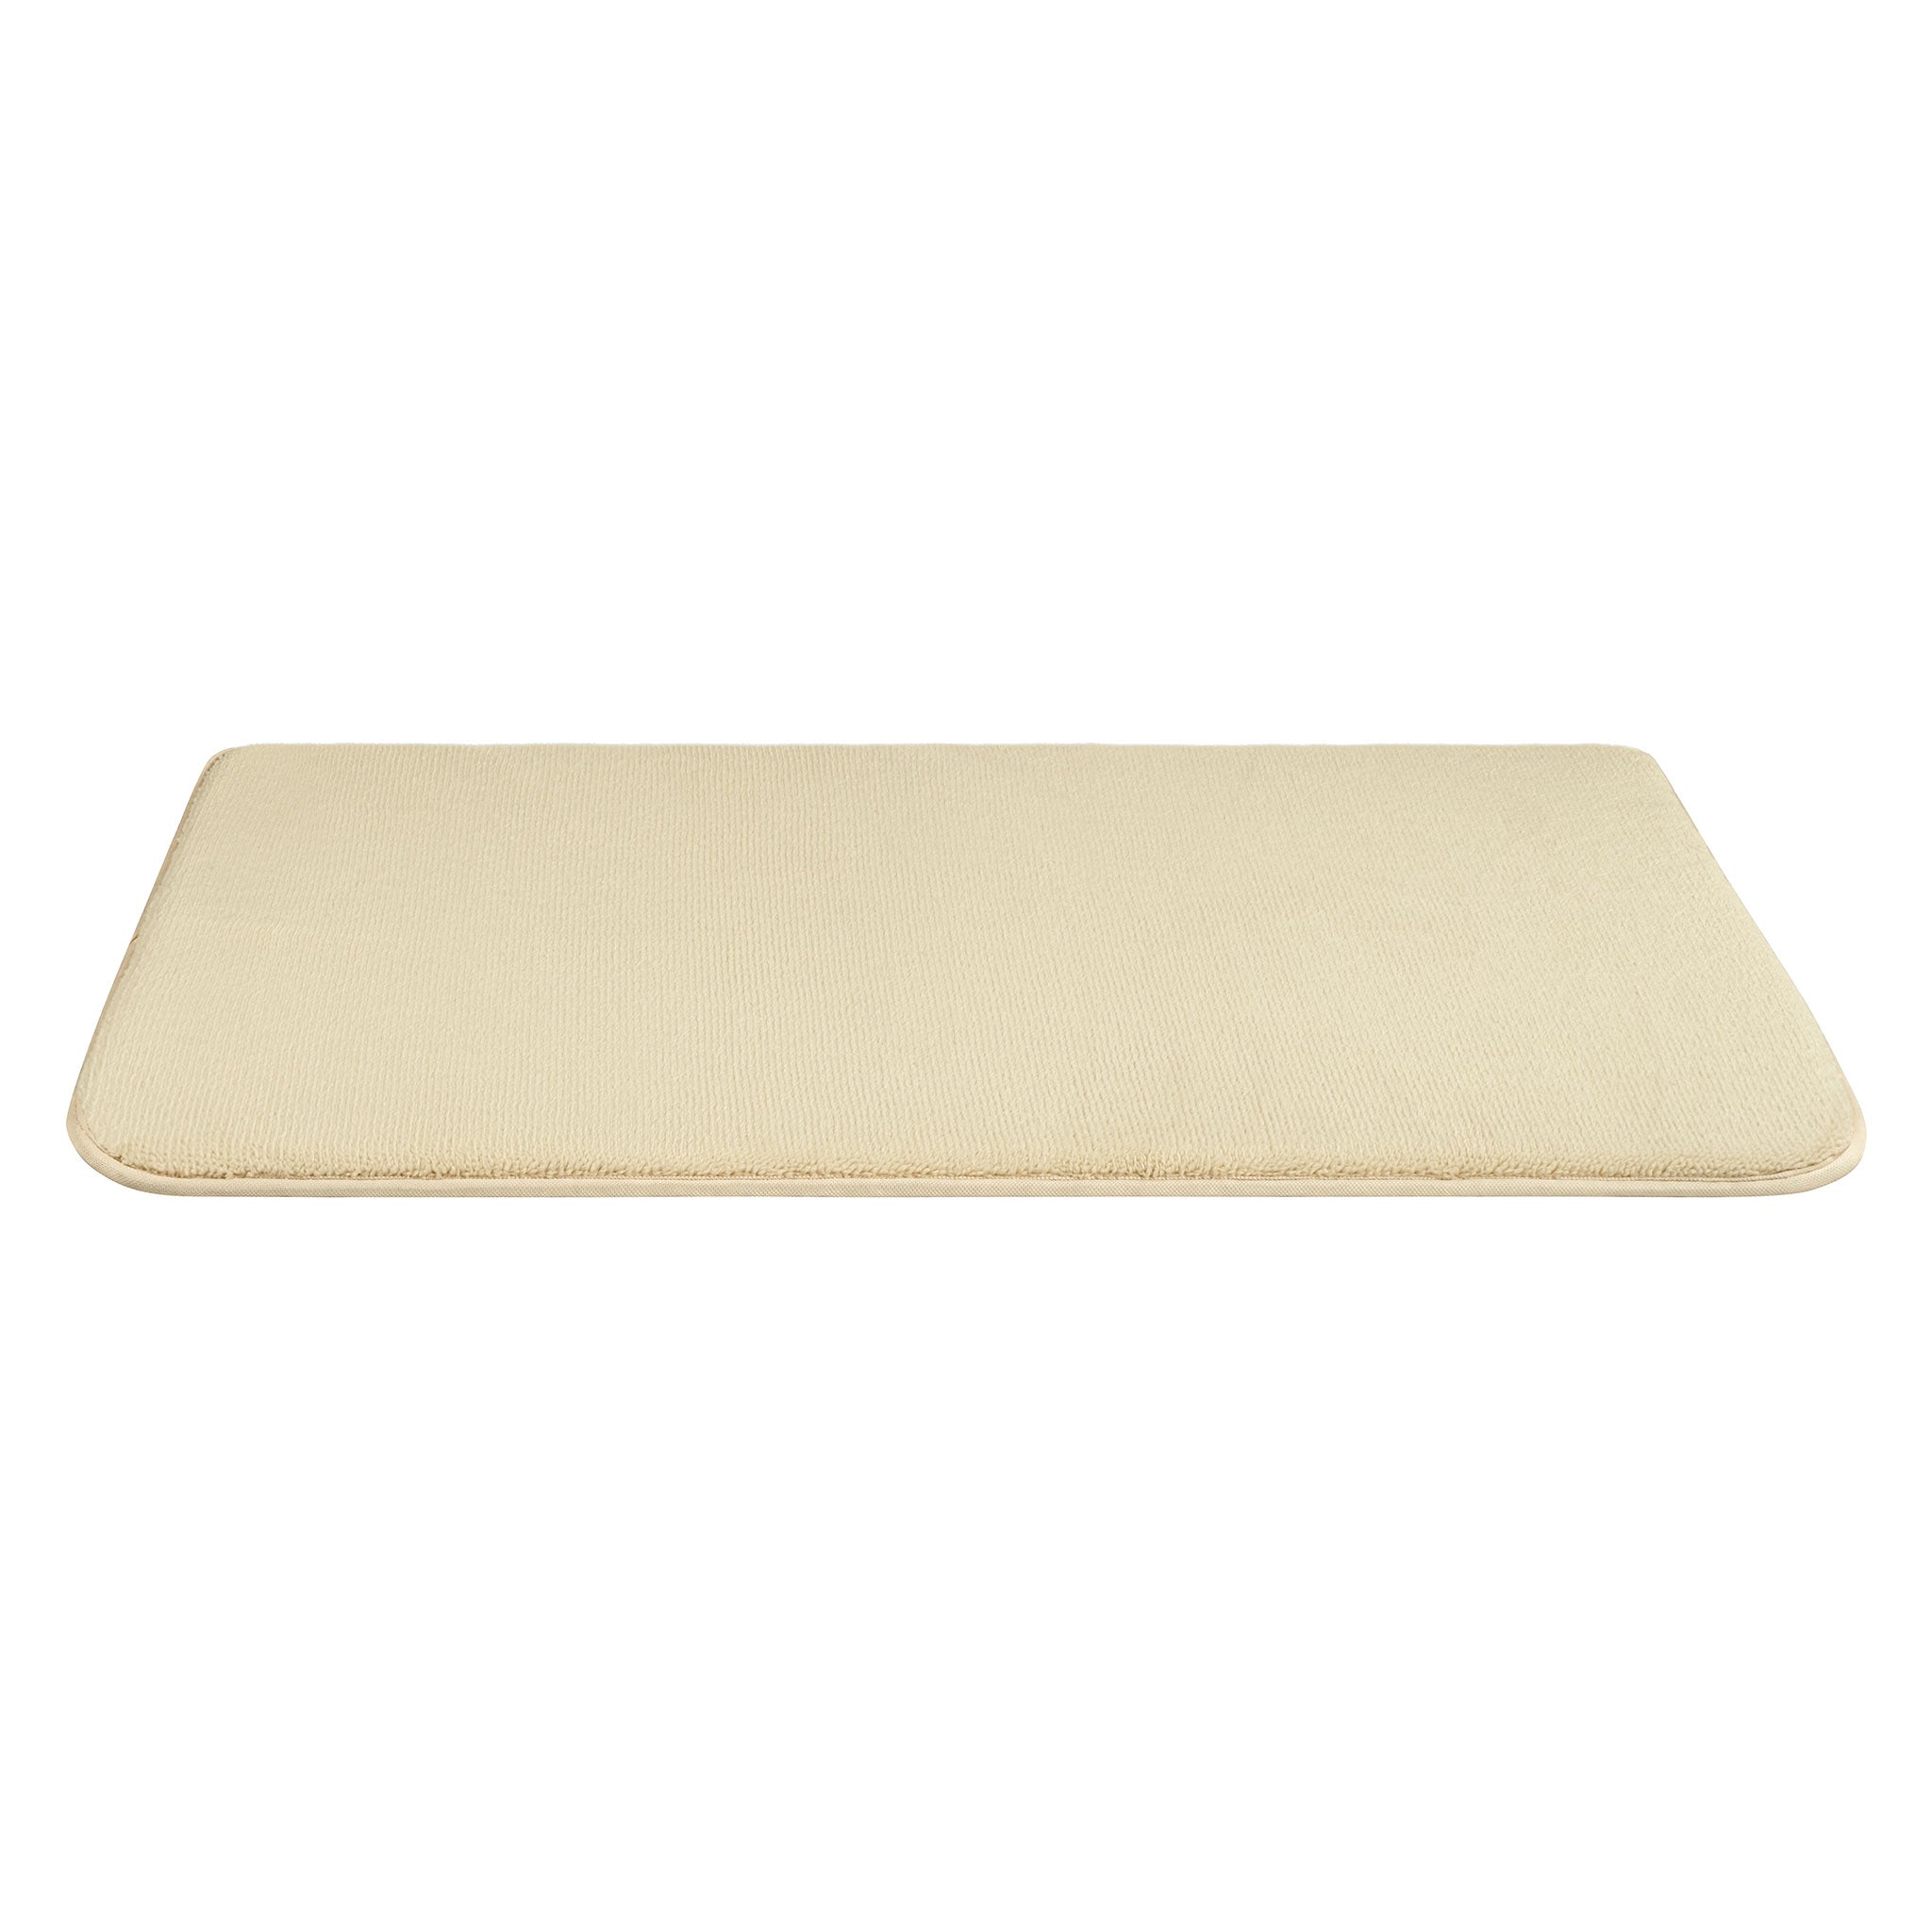 American Soft Linen - Fluffy Foamed Non-Slip Bath Rug 21x32 Inch -  18 Set Case Pack - Sand-Taupe - 6